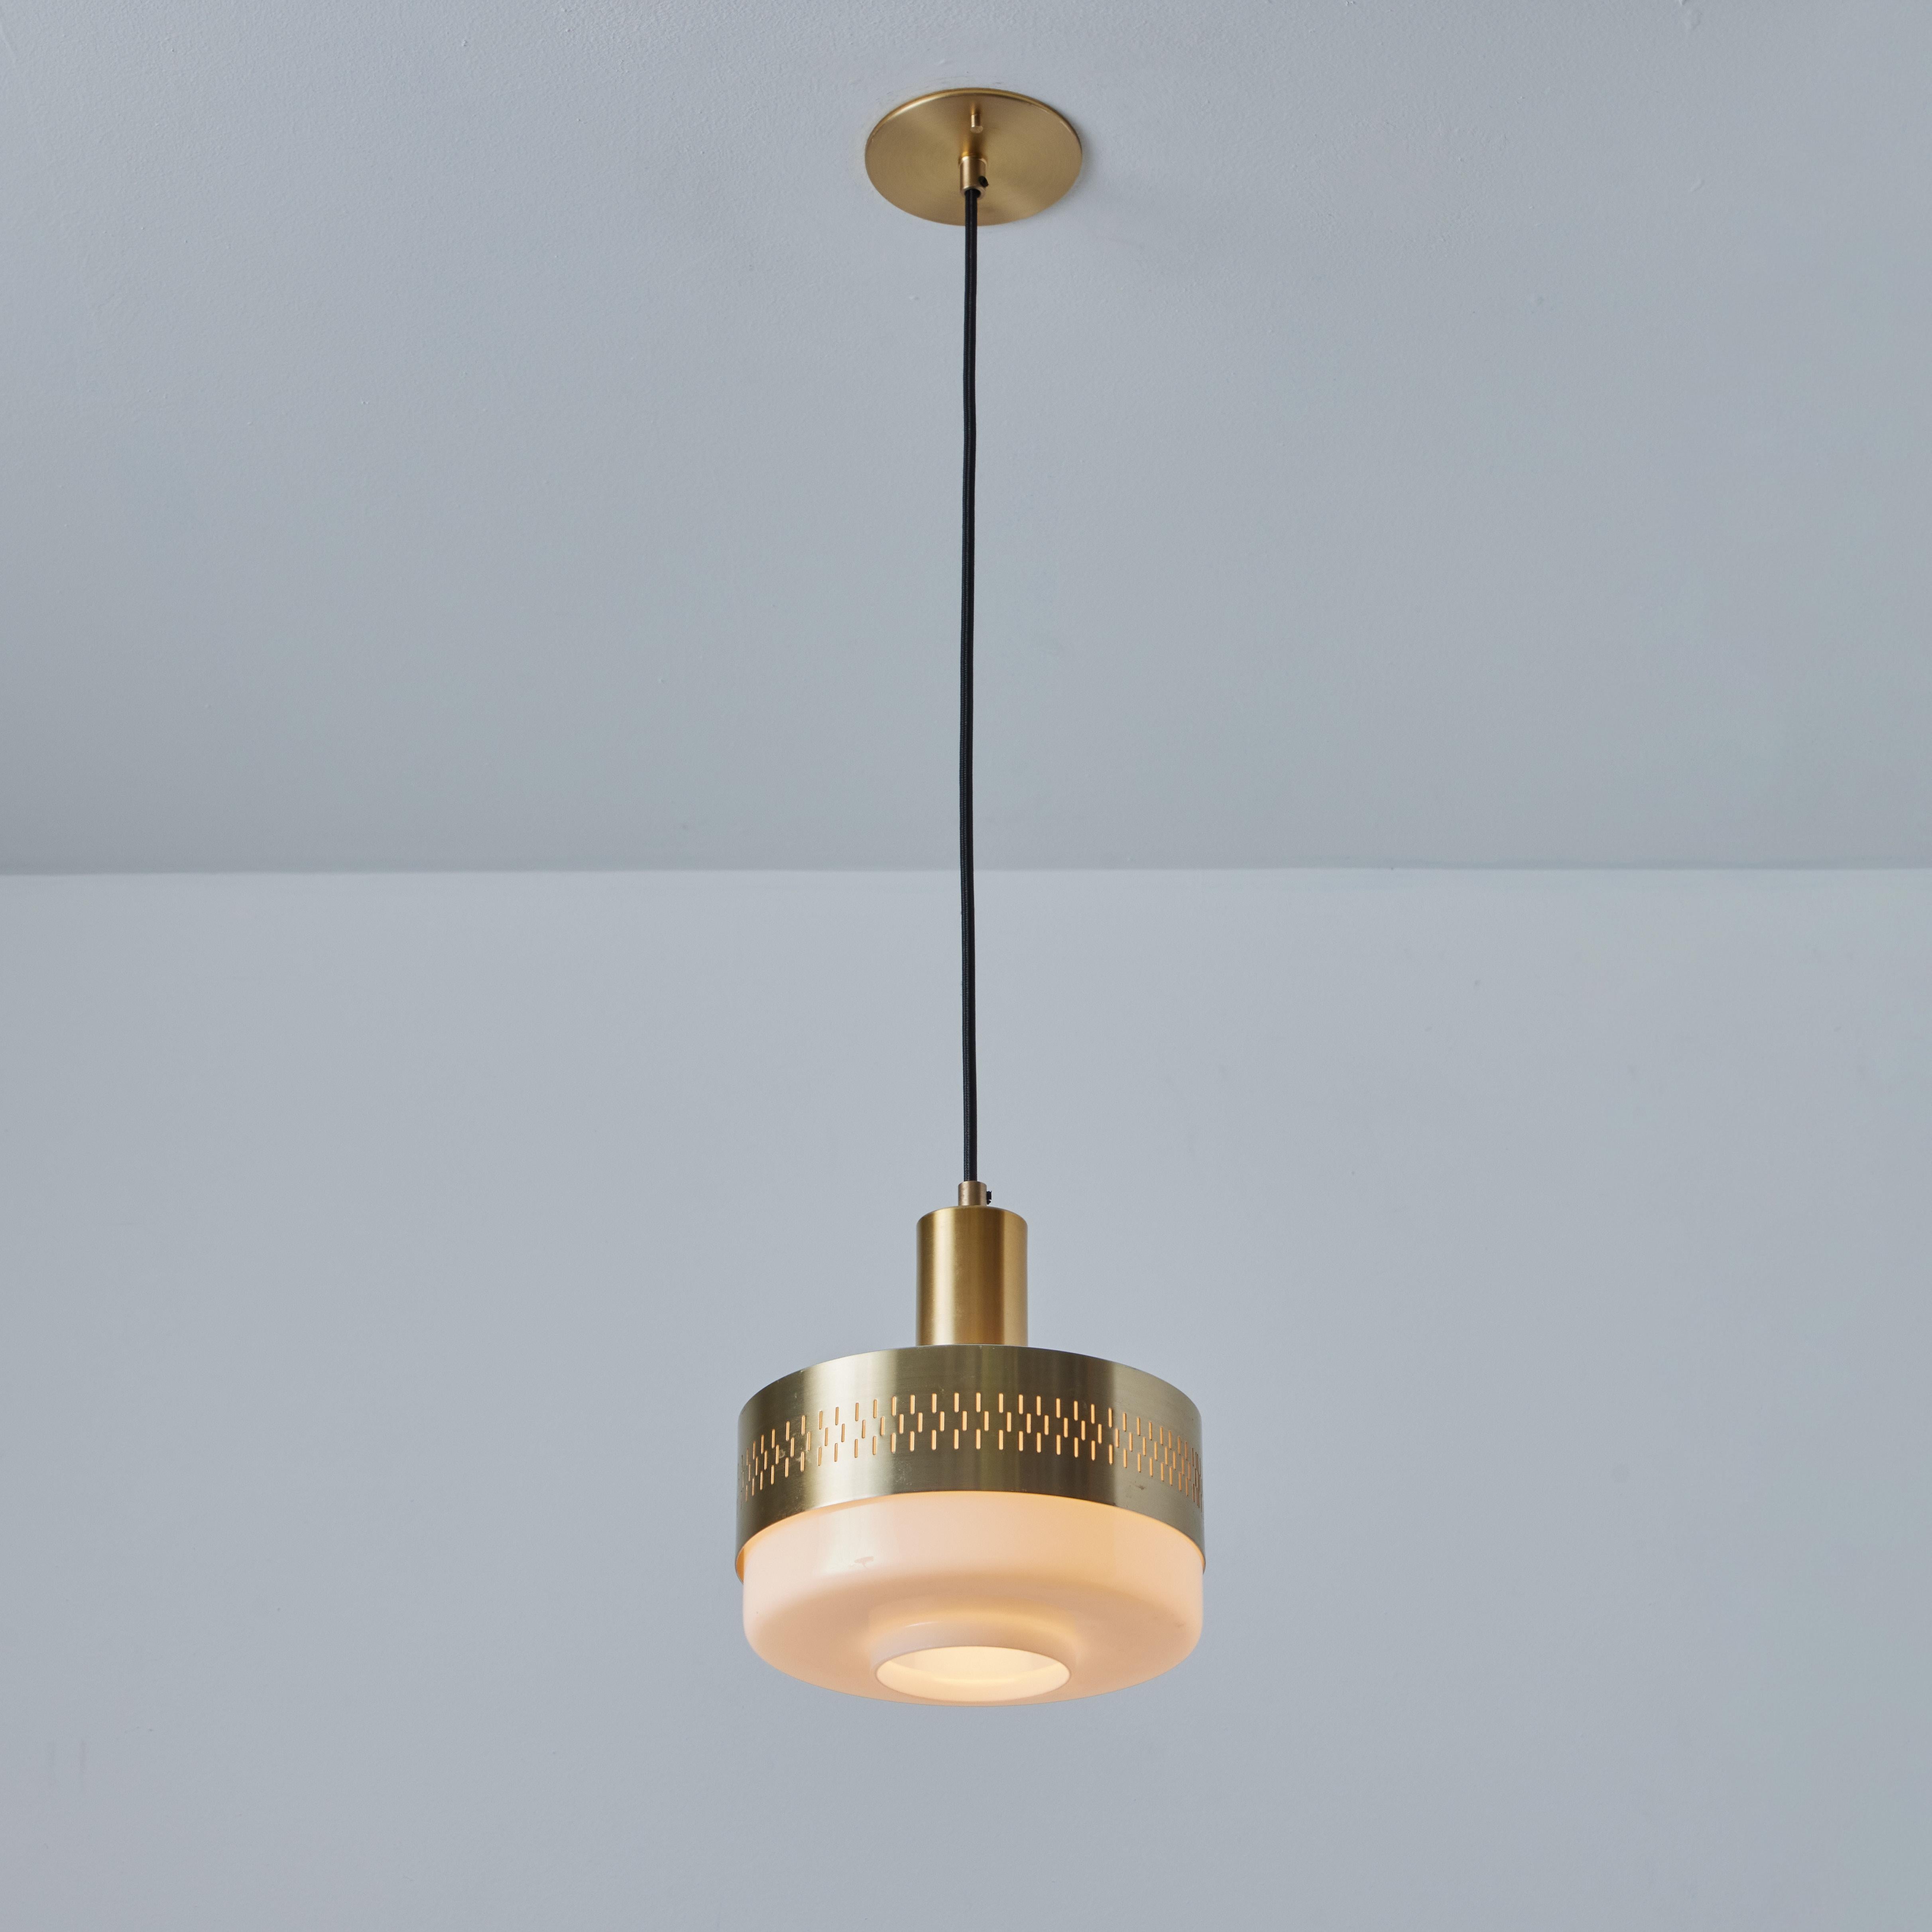 Scandinavian Modern 1960s Perforated Brass & Glass Pendant Attributed to Hans-Agne Jakobsson For Sale